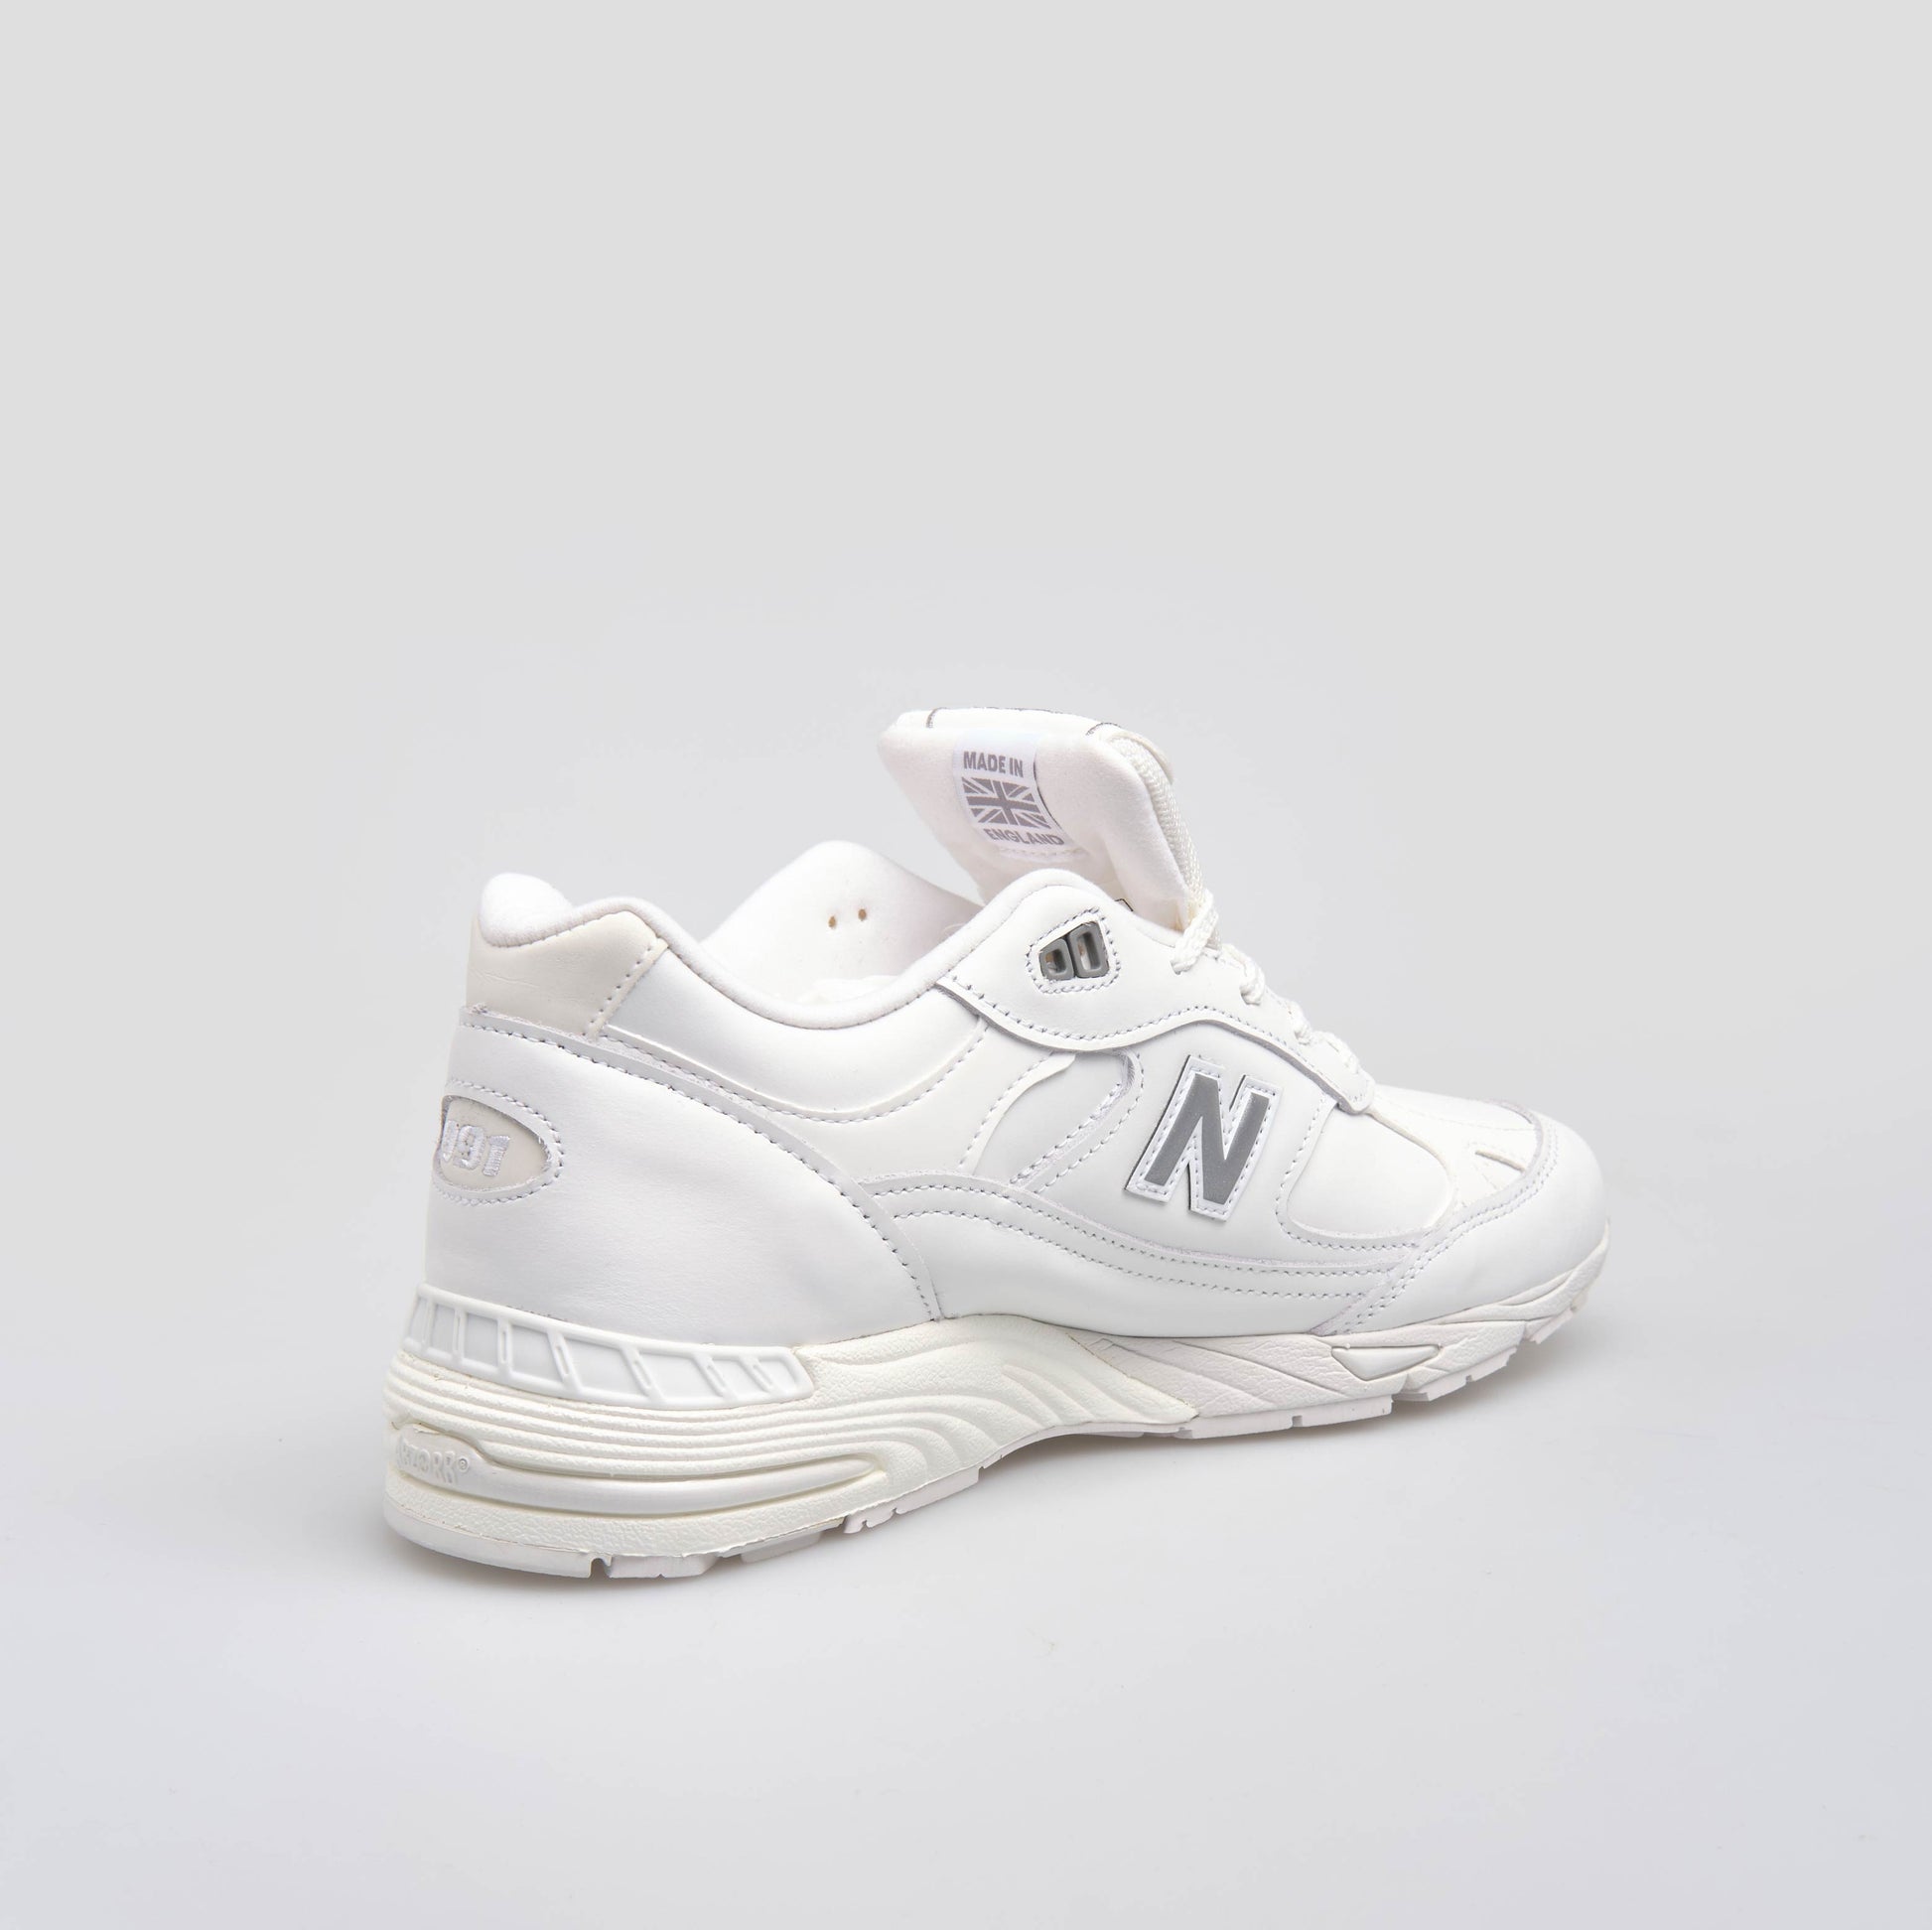 New Balance Zapatilla 991 Made in UK - W991TW - Colección Chica